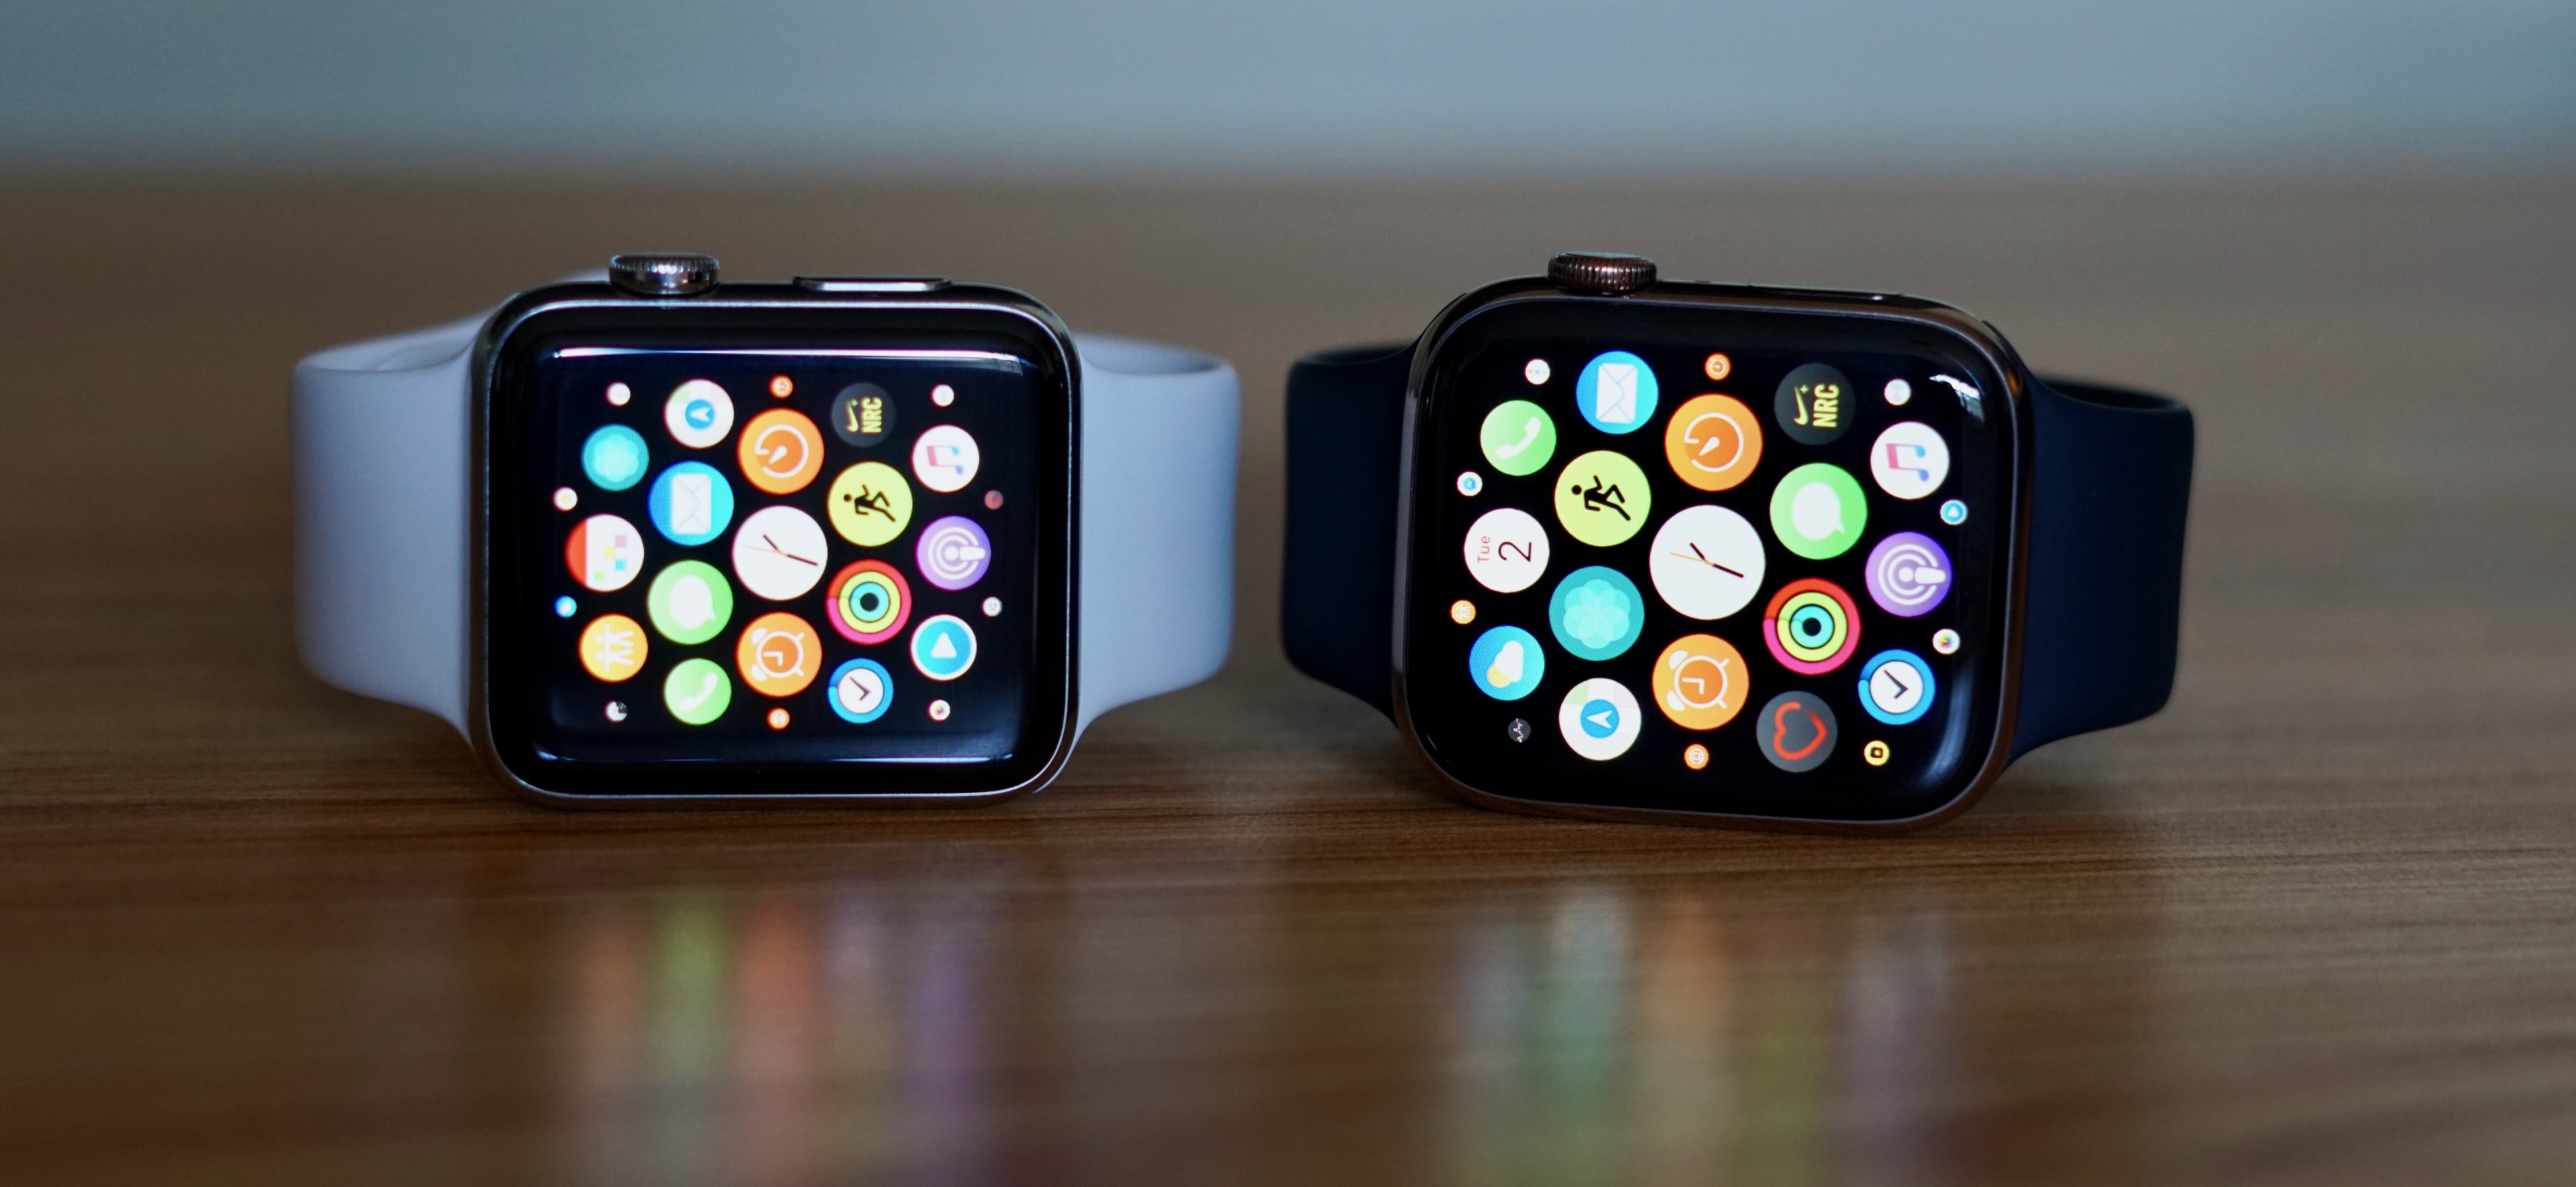 Apple Watch Series review features, design, ECG, more 9to5Mac